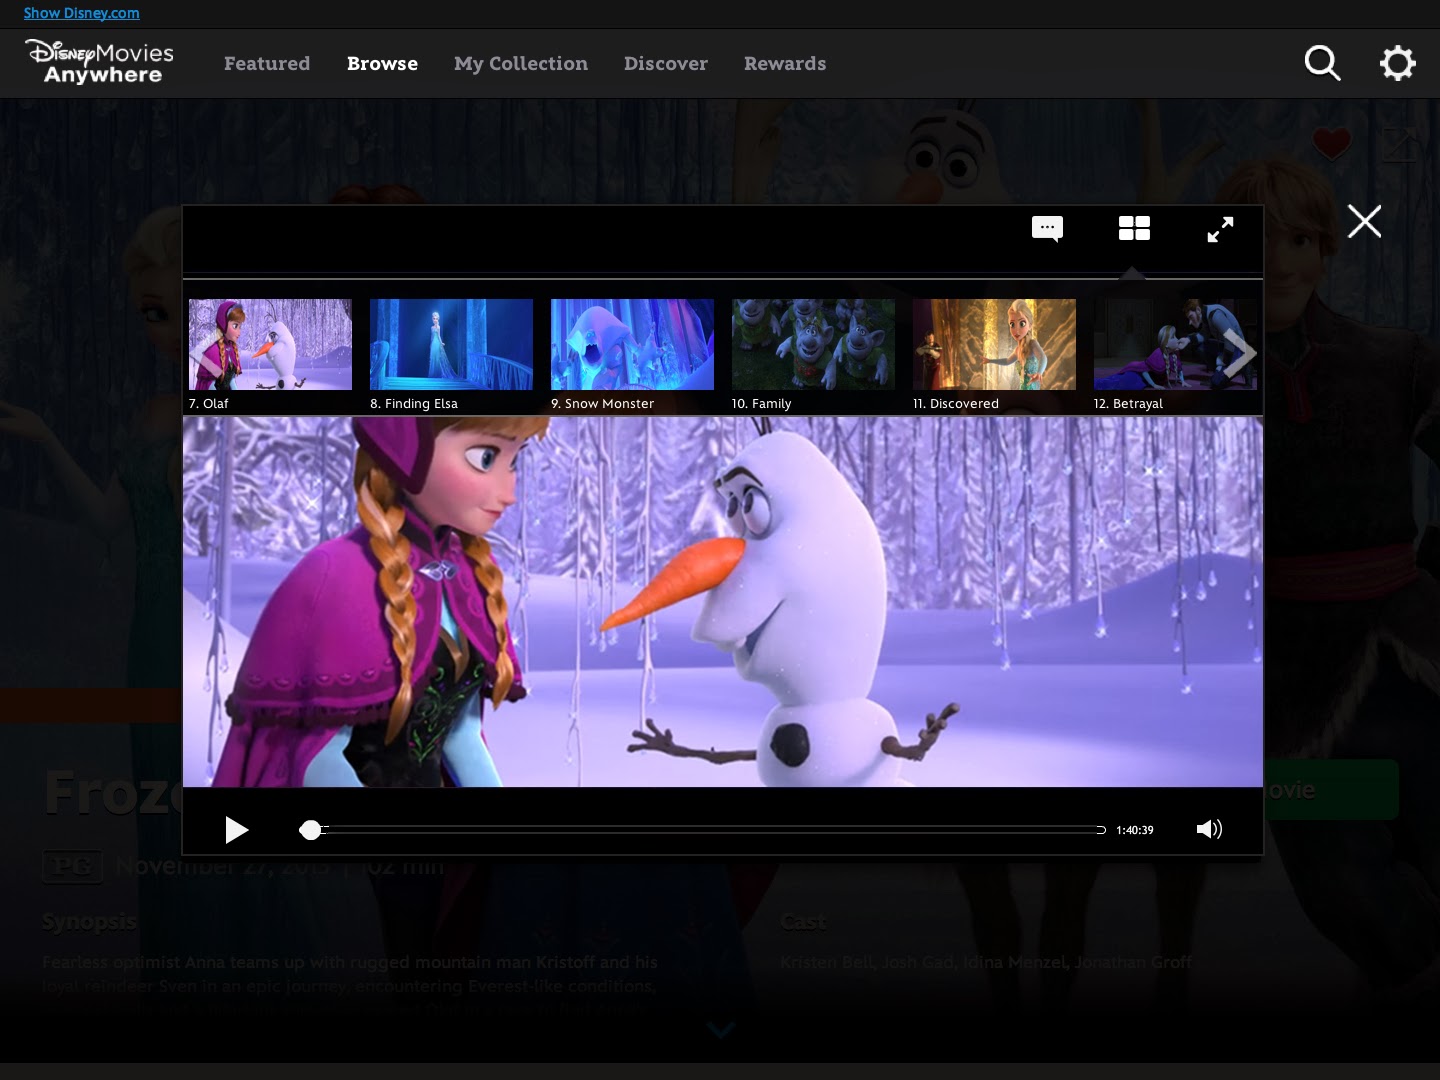 Disney Launches Disney Movies Anywhere on iTunes with 400 Titles Plus Free digital copy of "The Incredibles"